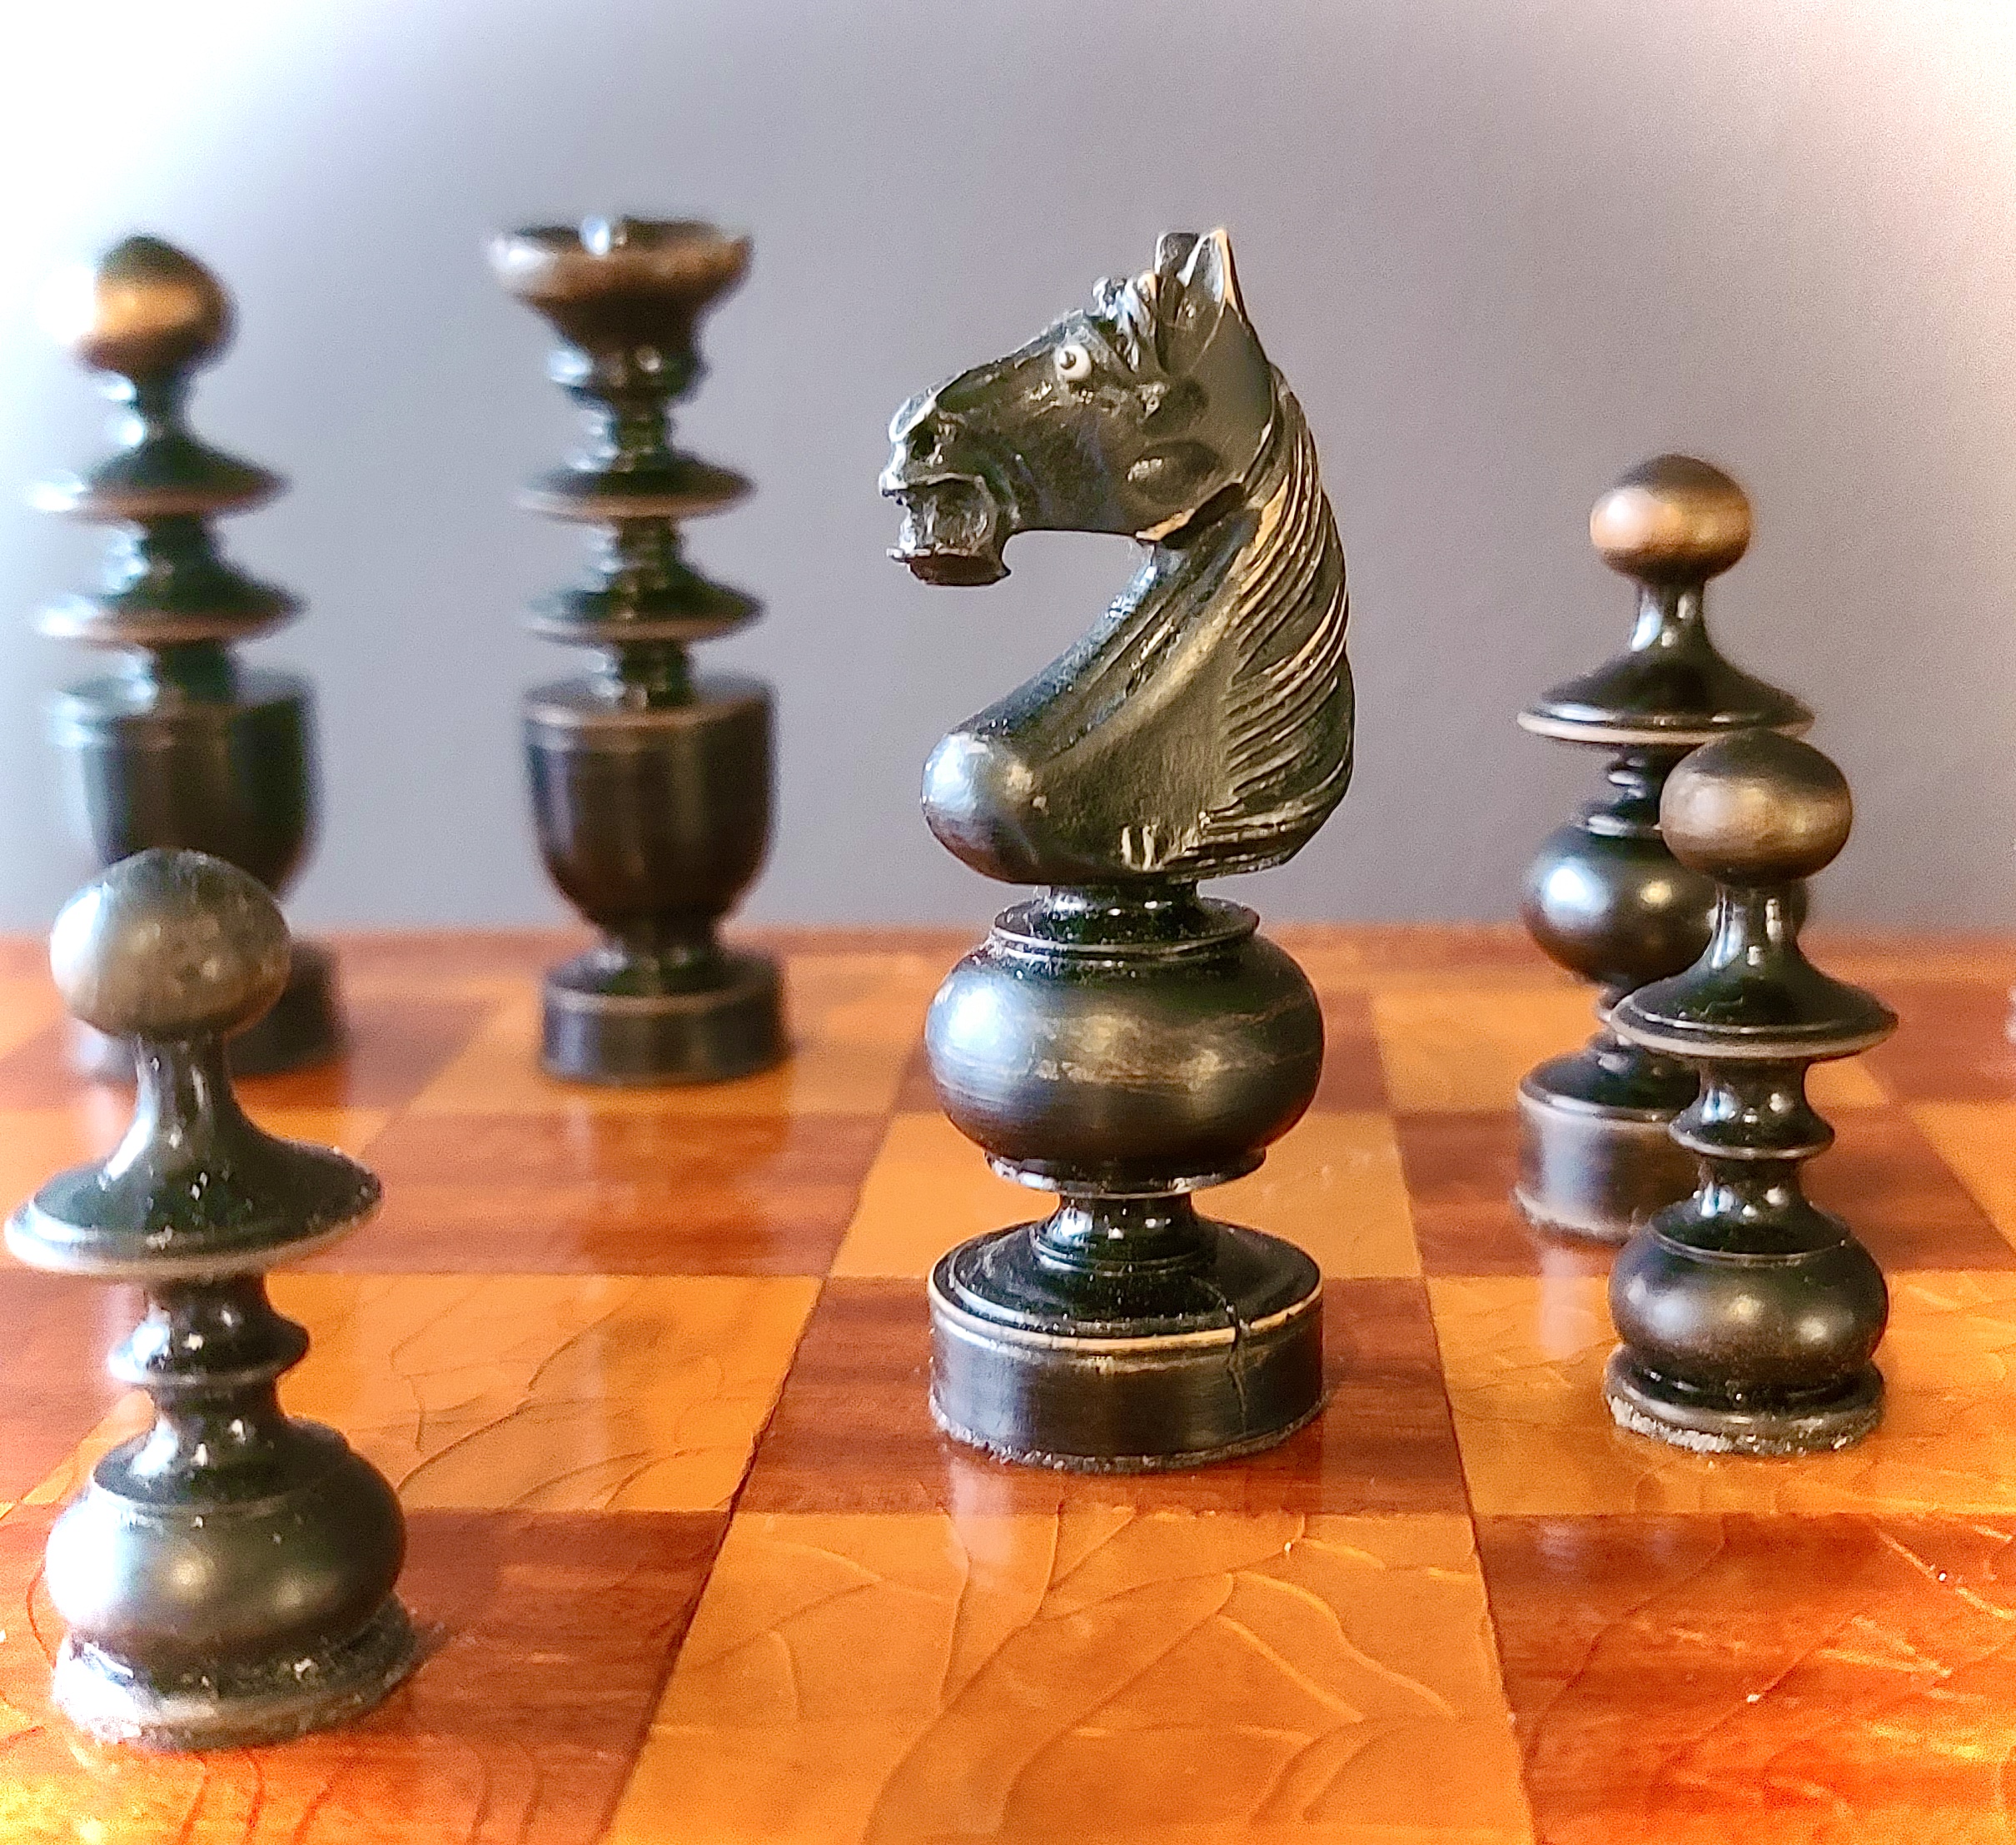 Chess Players Archives - Regency Chess